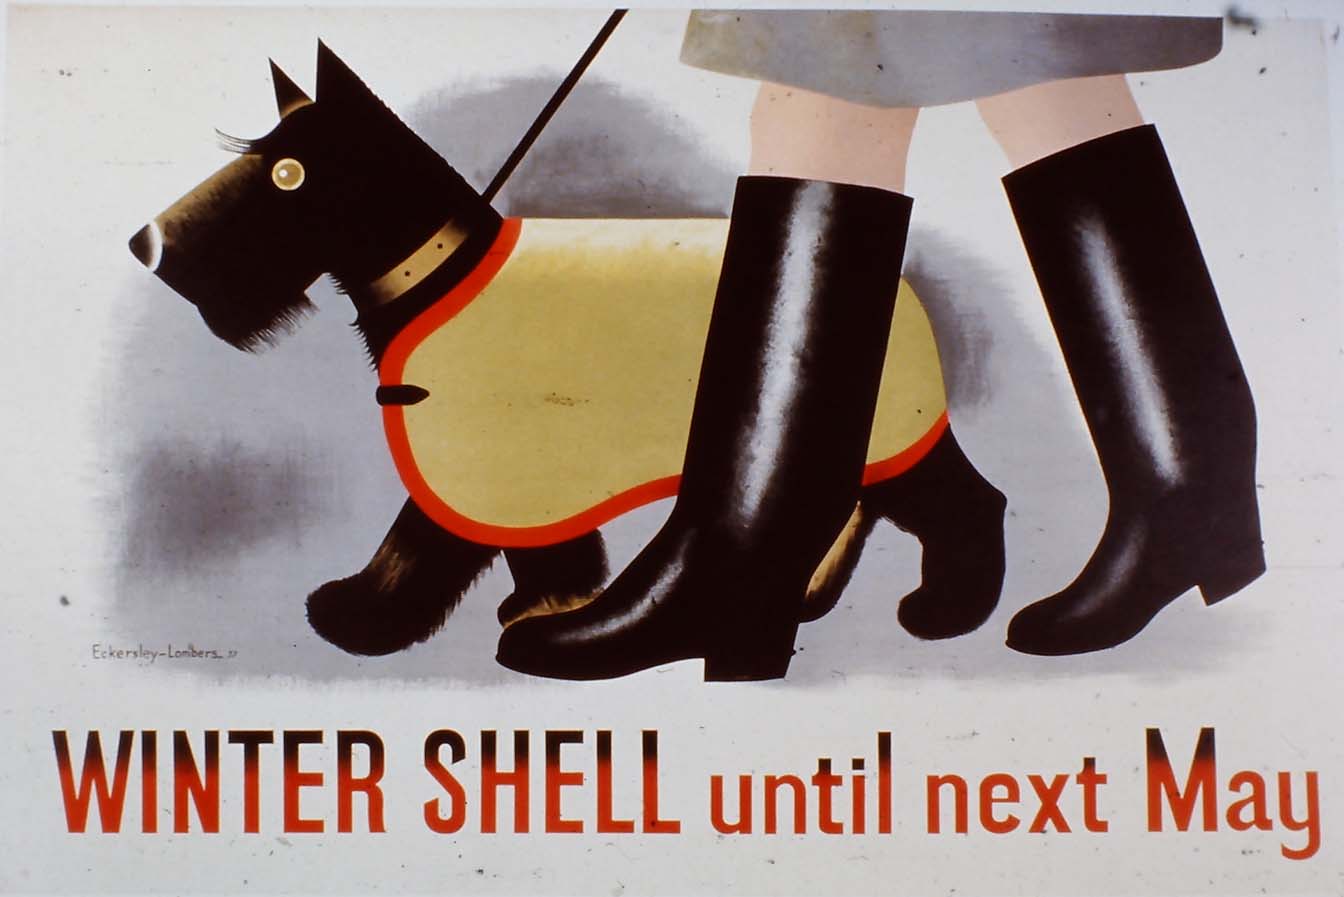 lithographic poster of a dog in a coat